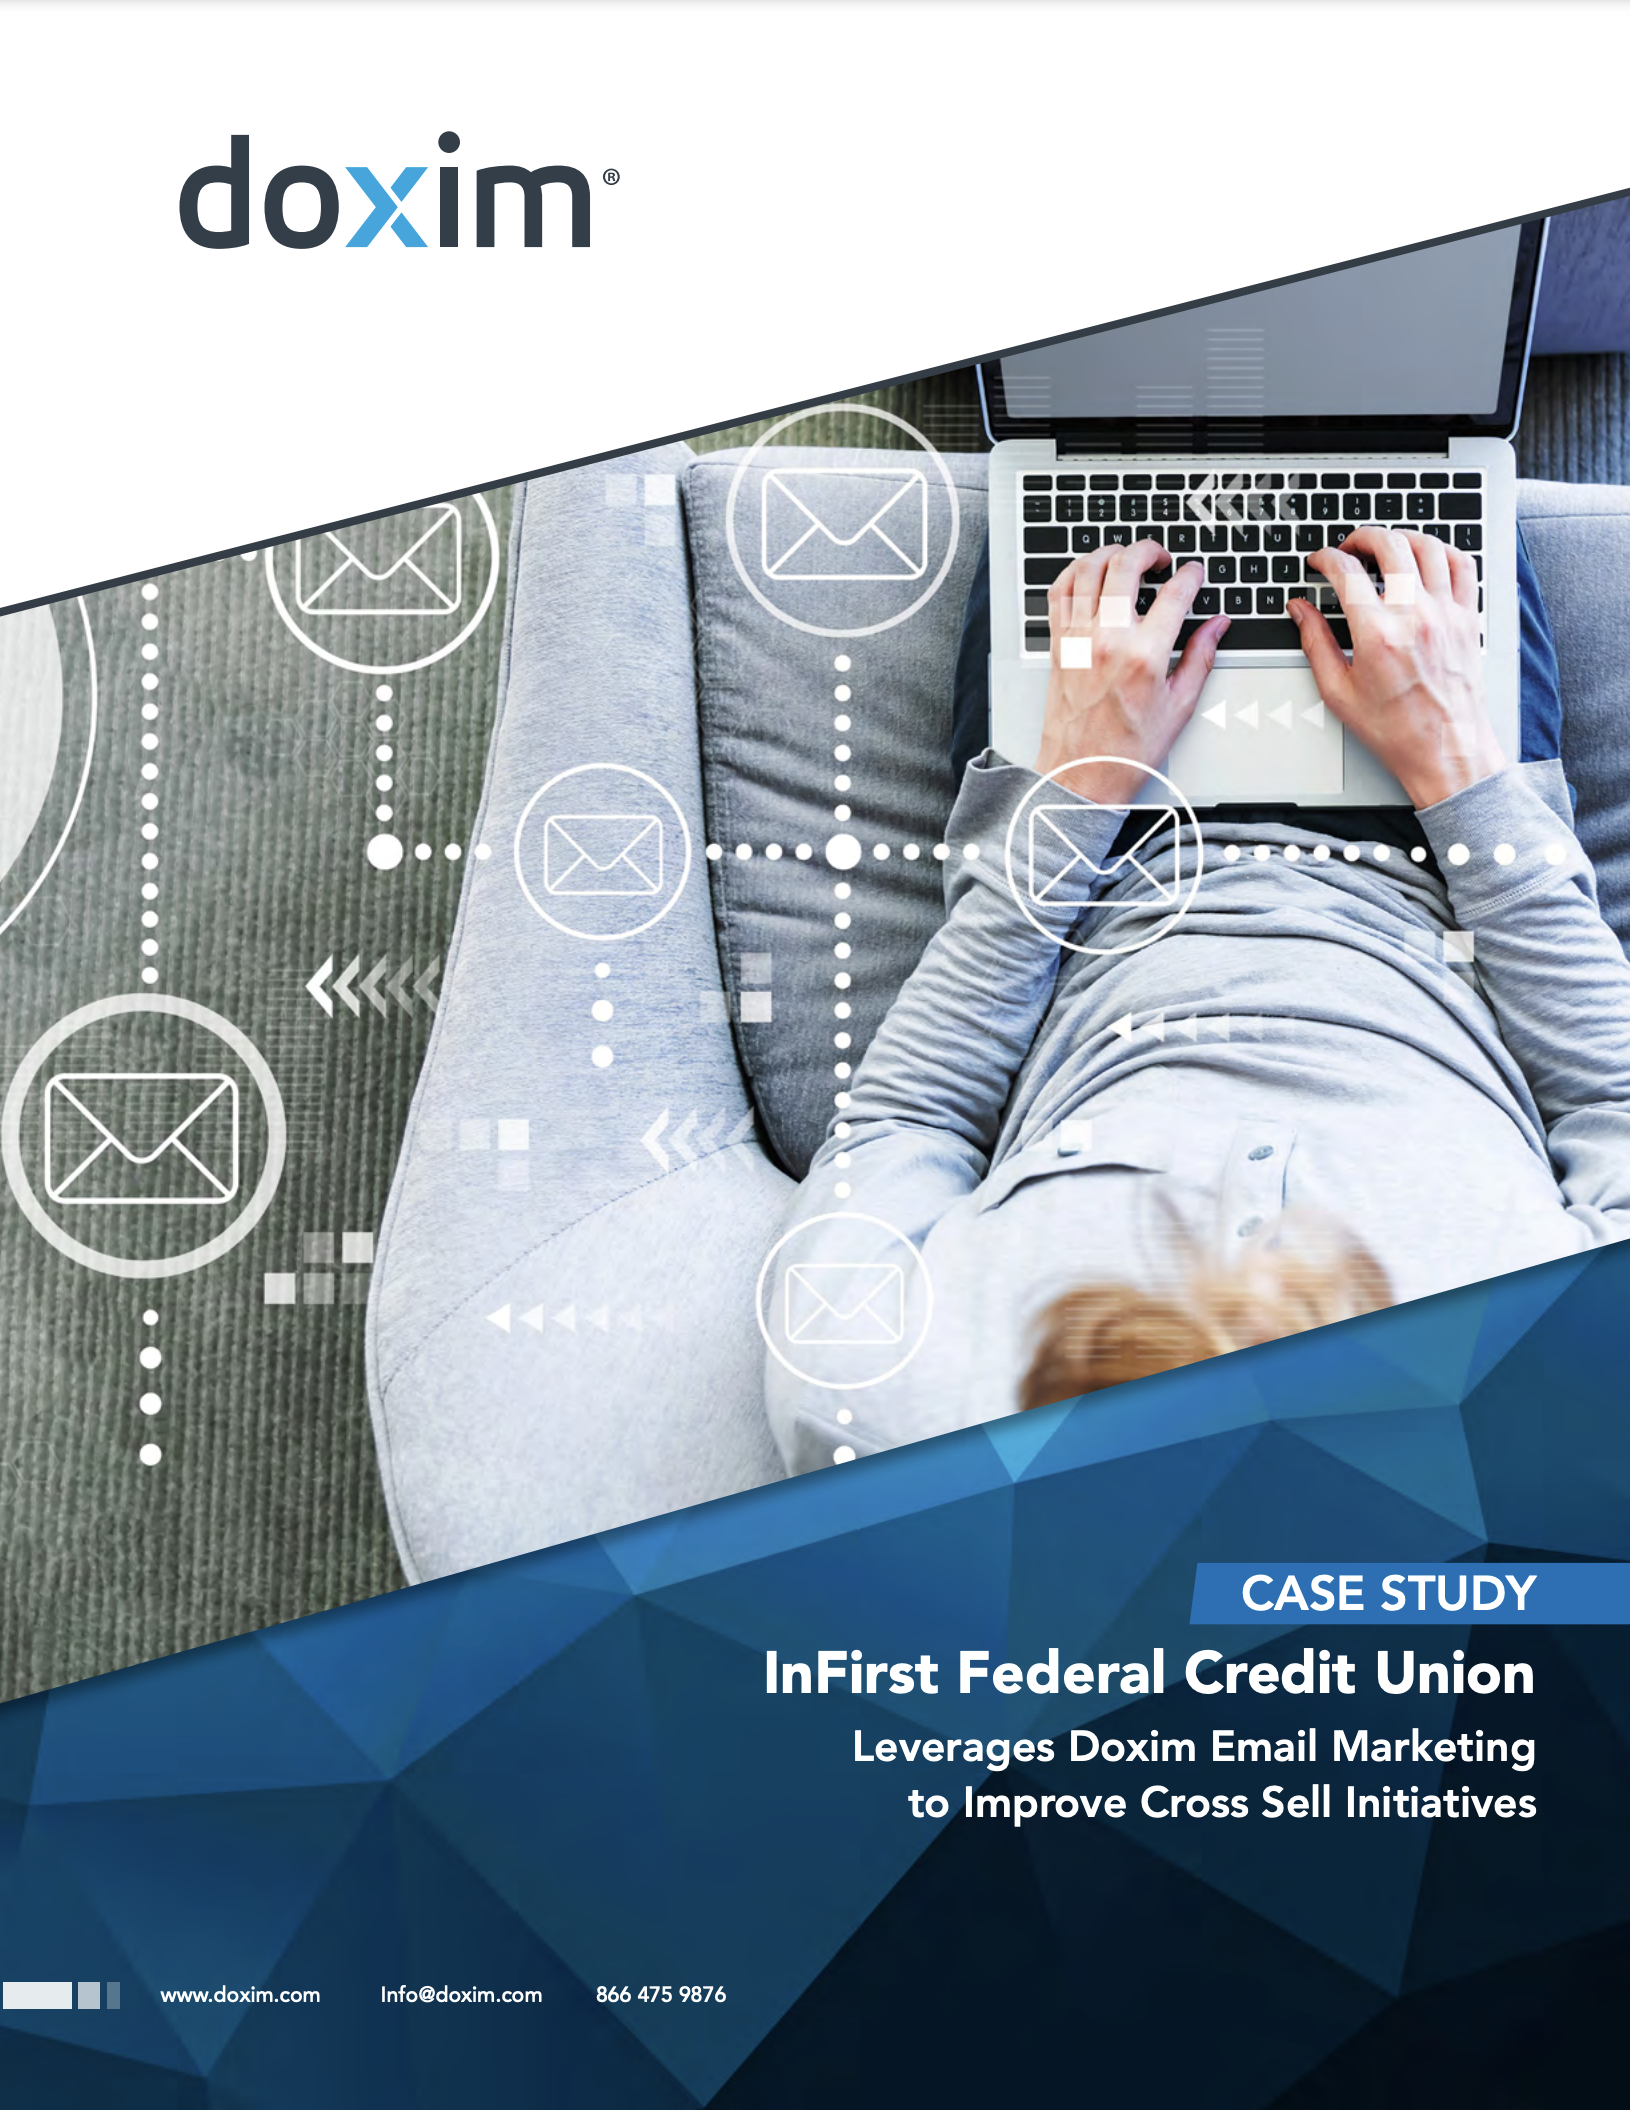 case study: InFirst Federal Credit Union Leverages Doxim Email Marketing to Improve Cross Sell Initiatives